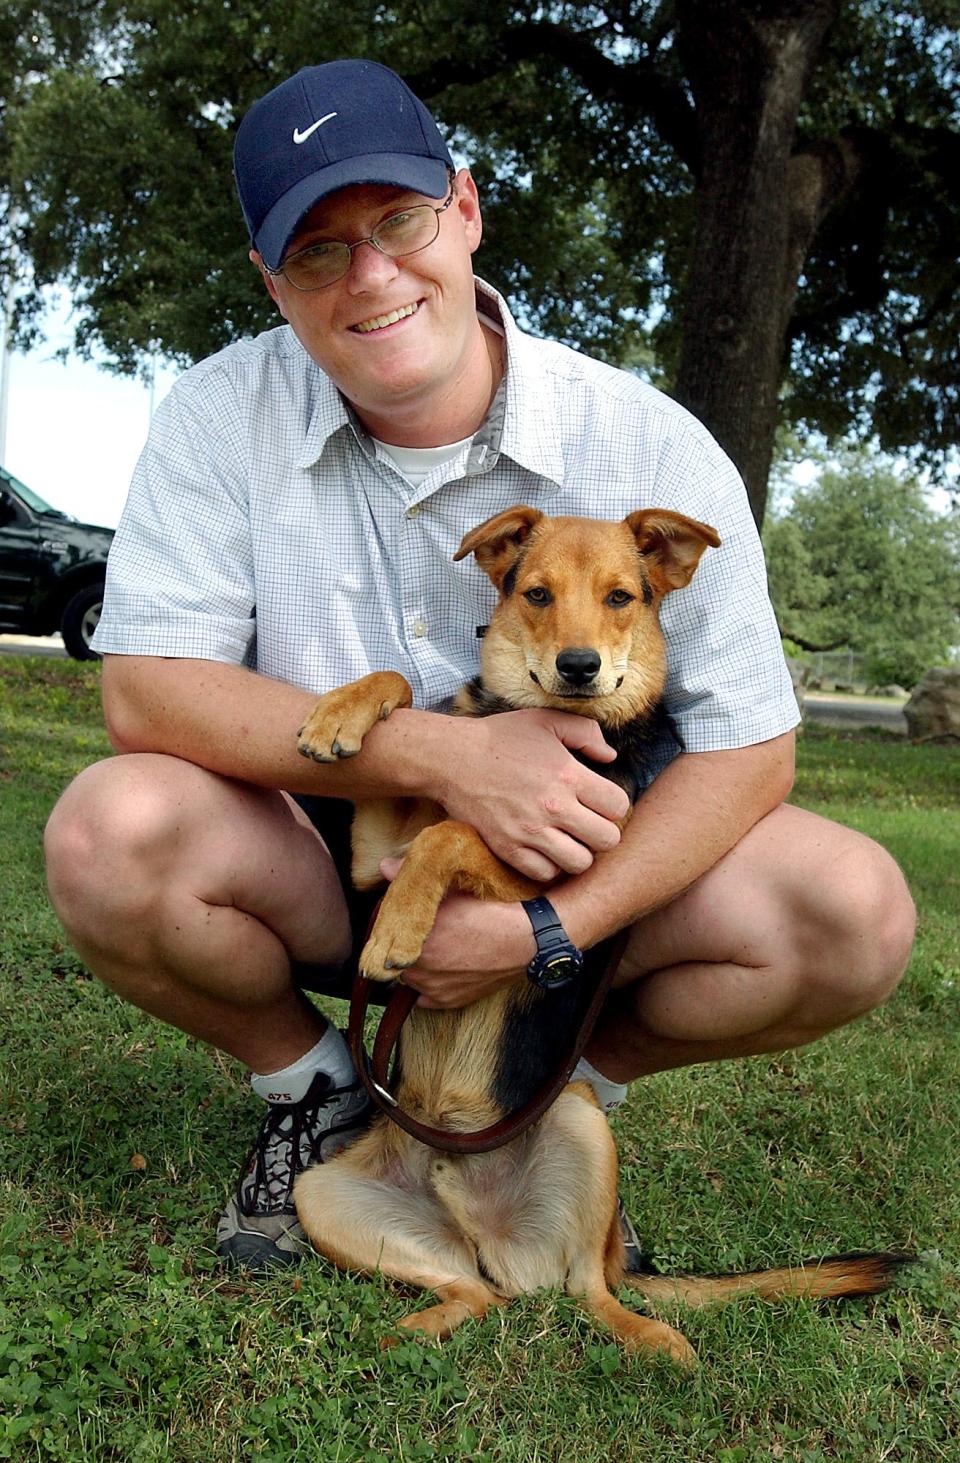 Phillip Paris is seen in this 2004 file photo when he was a Georgetown police officer and a dog trainer. He has been sued after a fire at his Georgetown kennel killed 75 dogs.